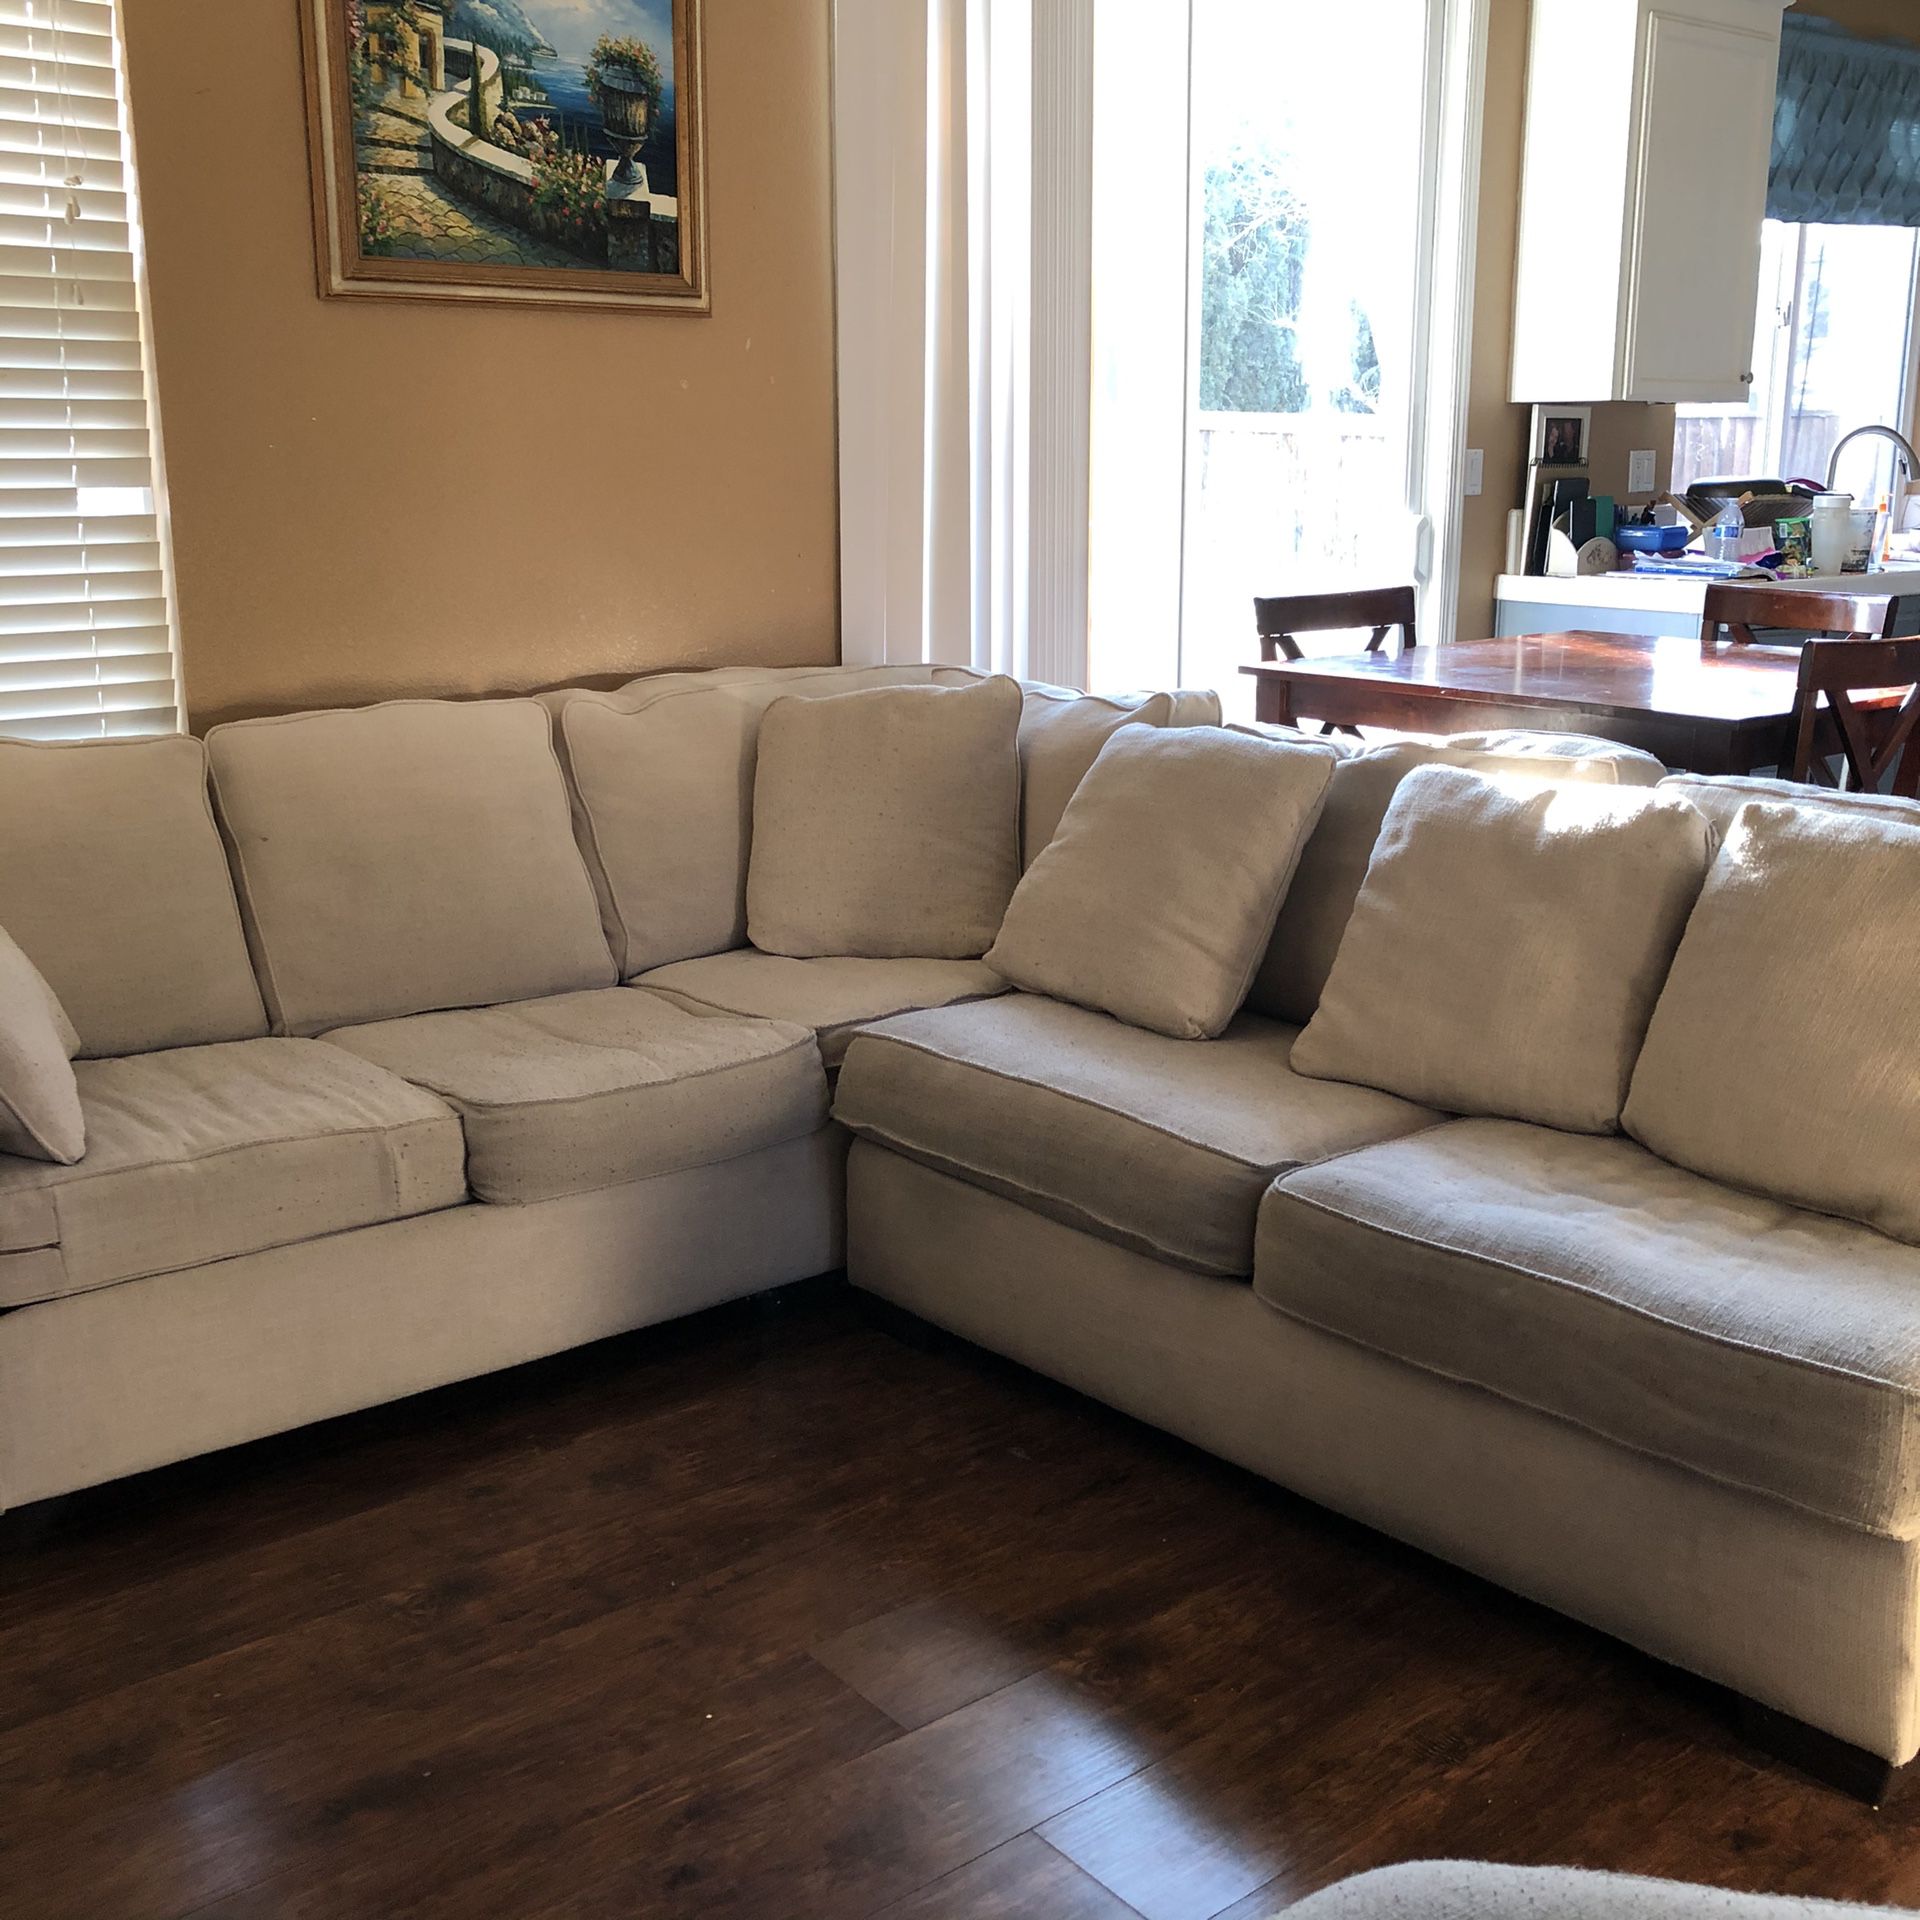 FREE 3 piece sectional sofa